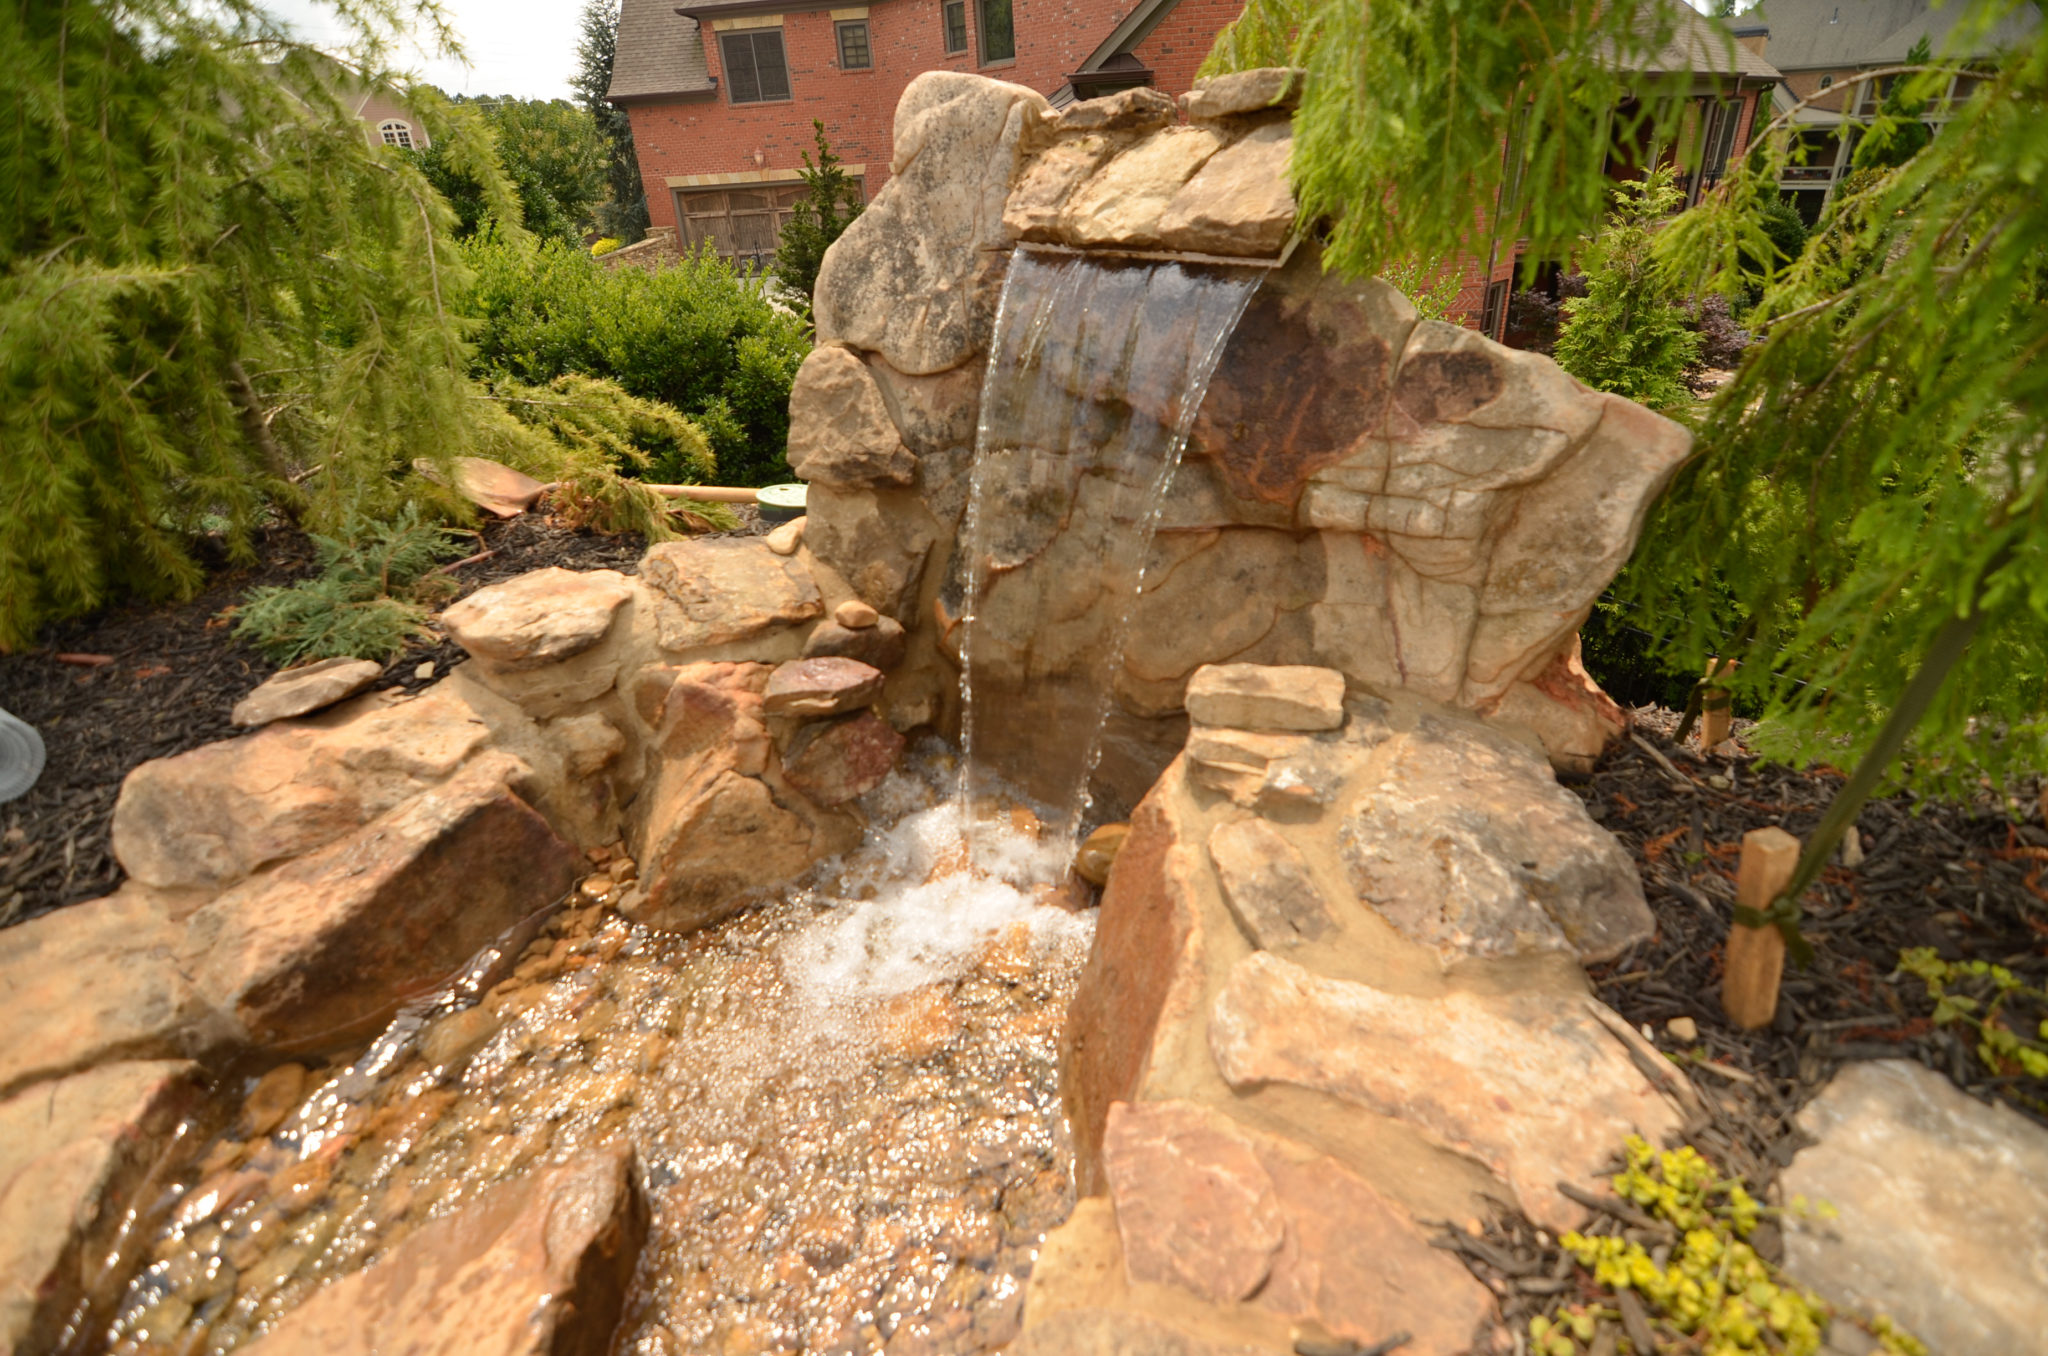 A custom sheer descent waterfall gracefully flowing into a tranquil pond.